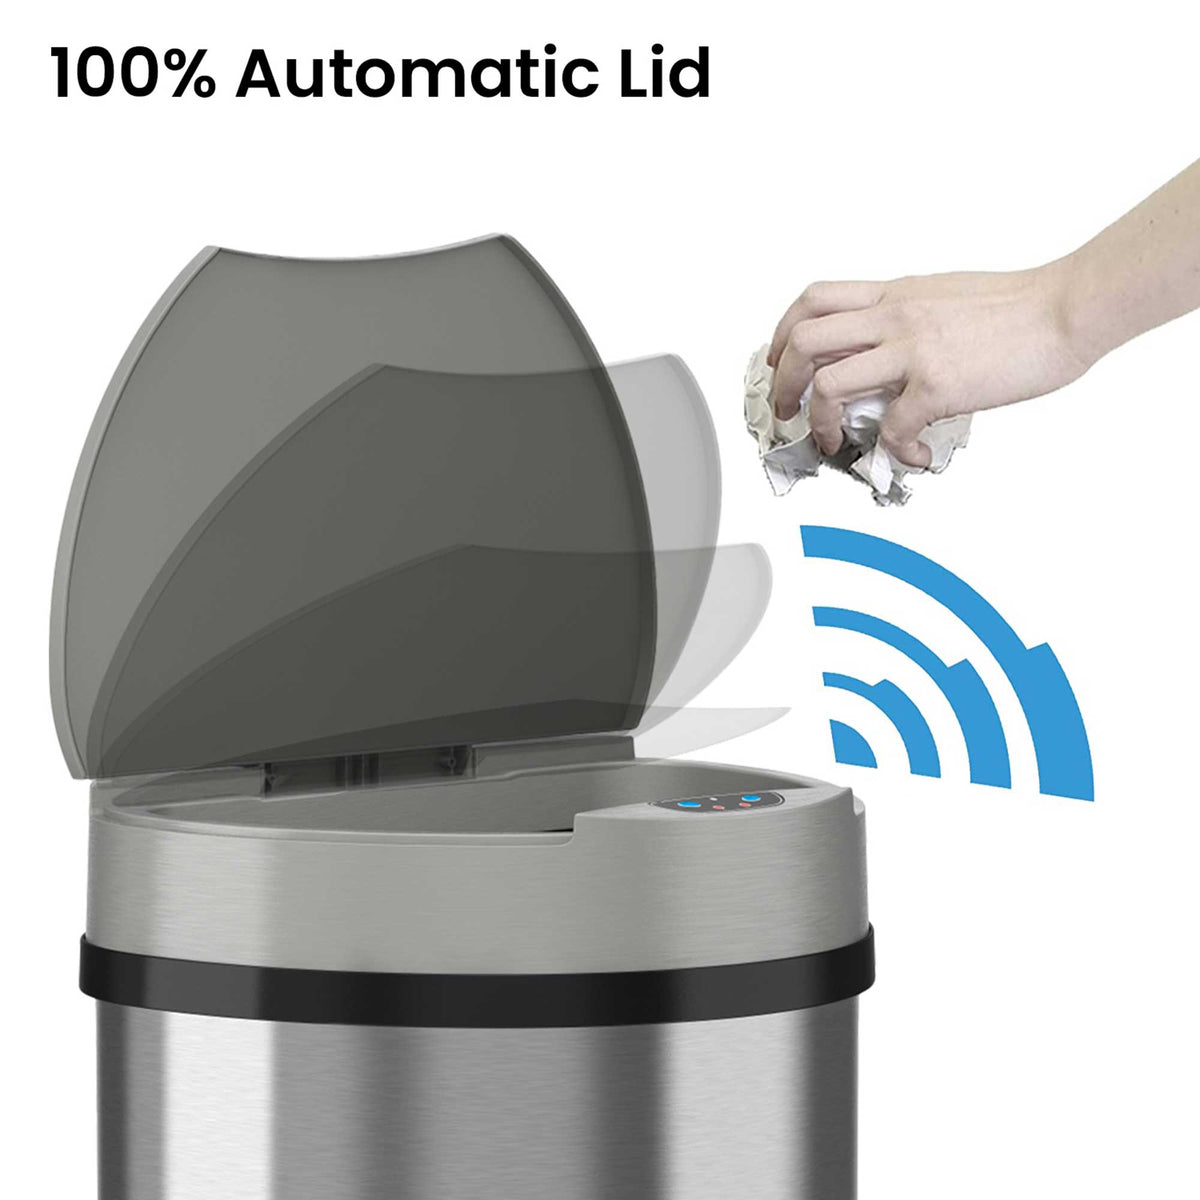 13 Gallon Semi-Round Stainless Steel Sensor Trash Can with Odor Filter 100% Automatic Lid